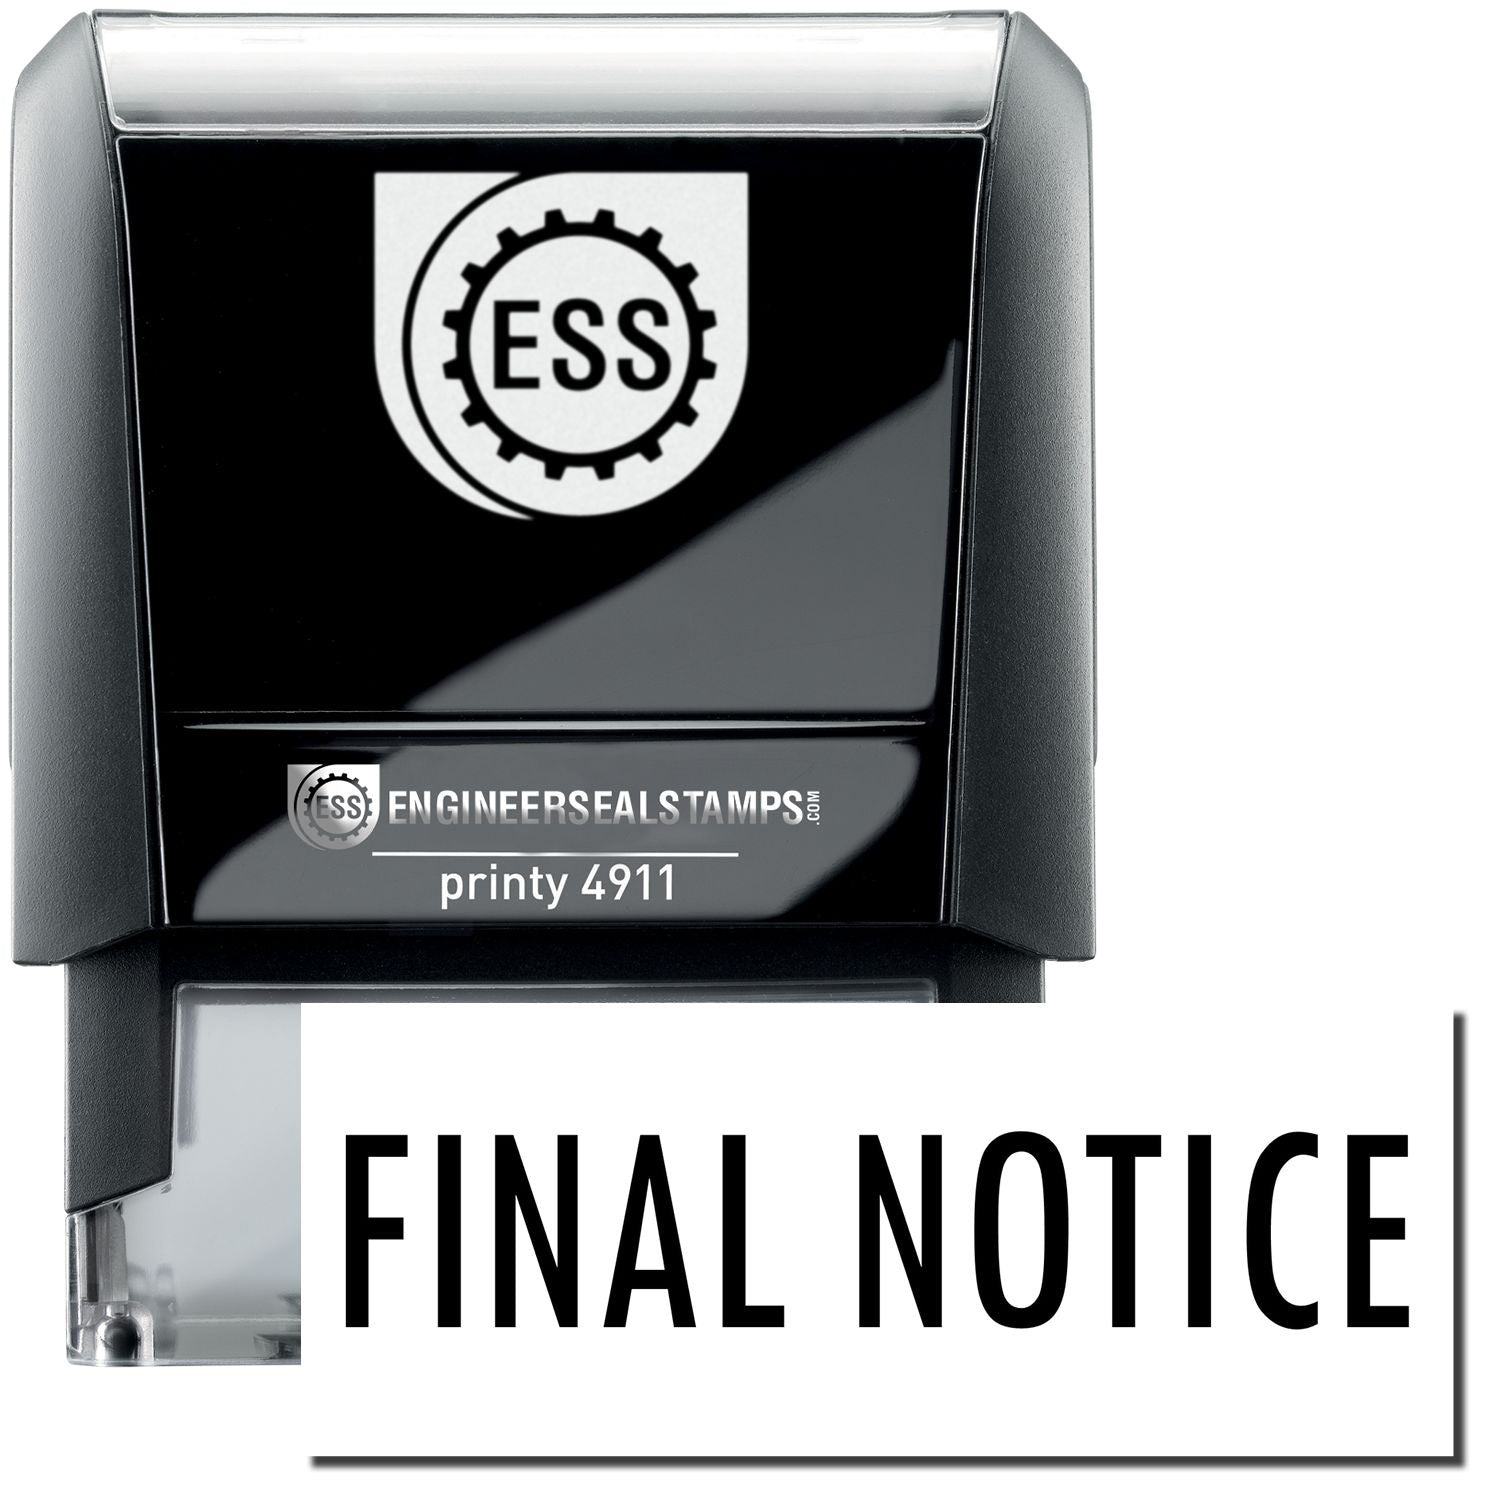 A self-inking stamp with a stamped image showing how the text "FINAL NOTICE" is displayed after stamping.